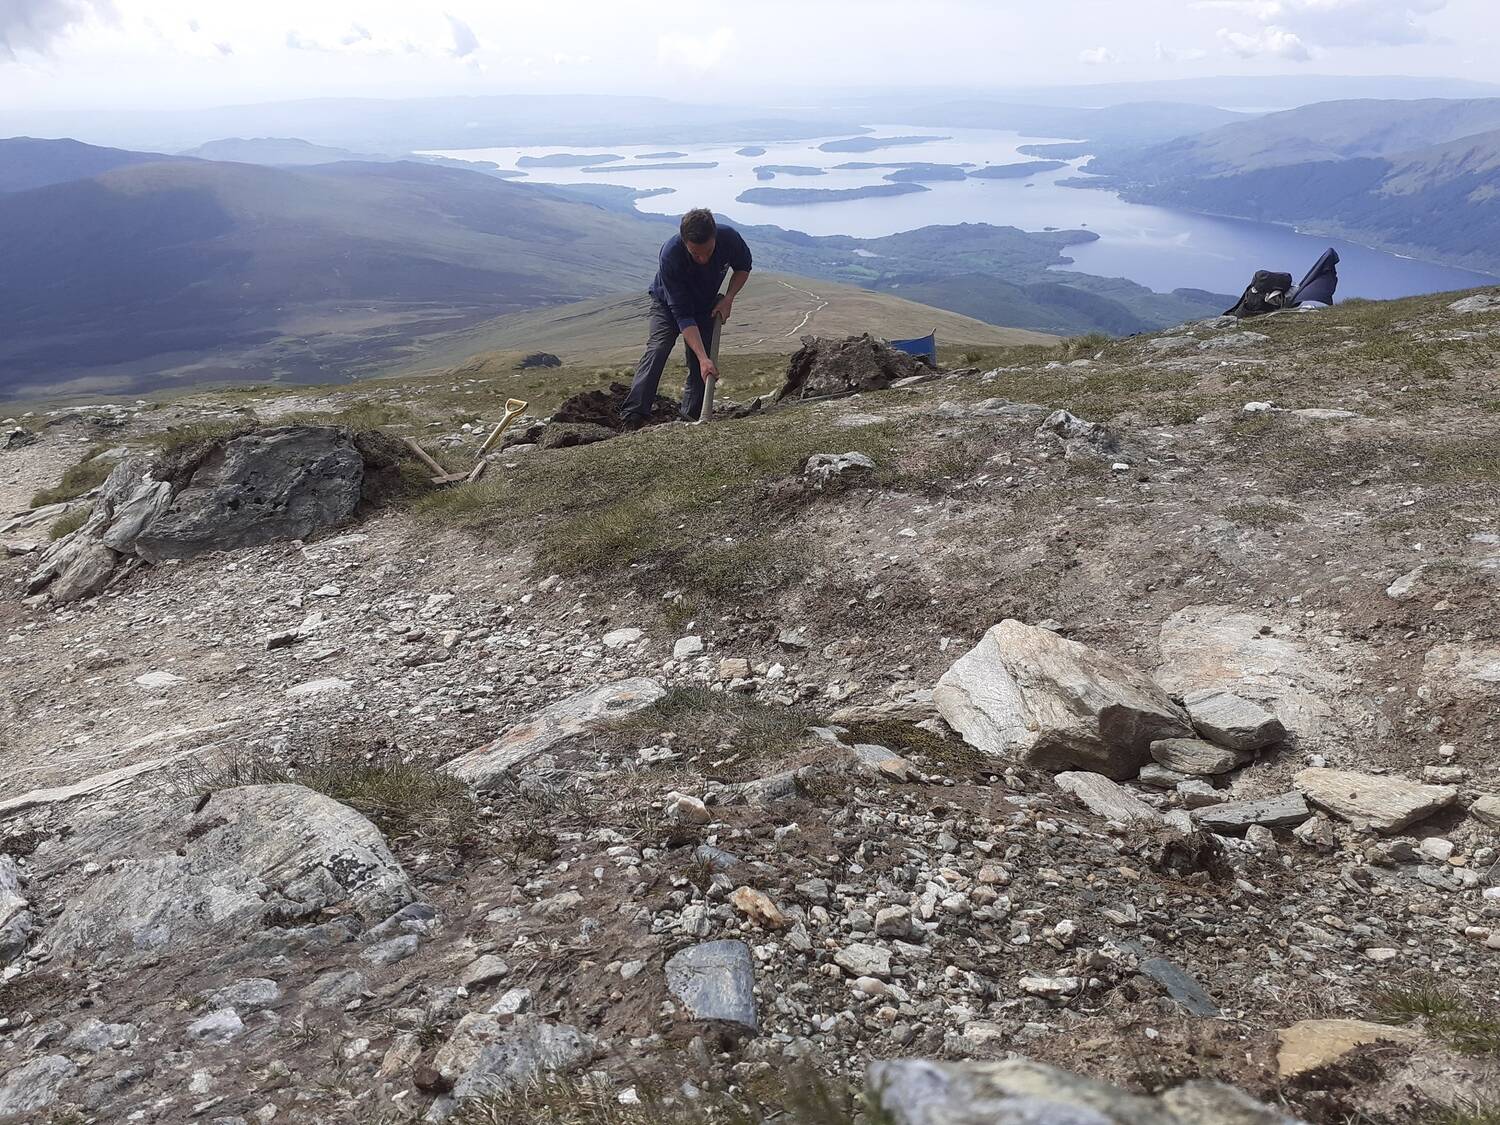 A man works on a rocky mountain summit, with Loch Lomond seen in the distance far below. He uses a sharp axe-like tool to work at the path edge.